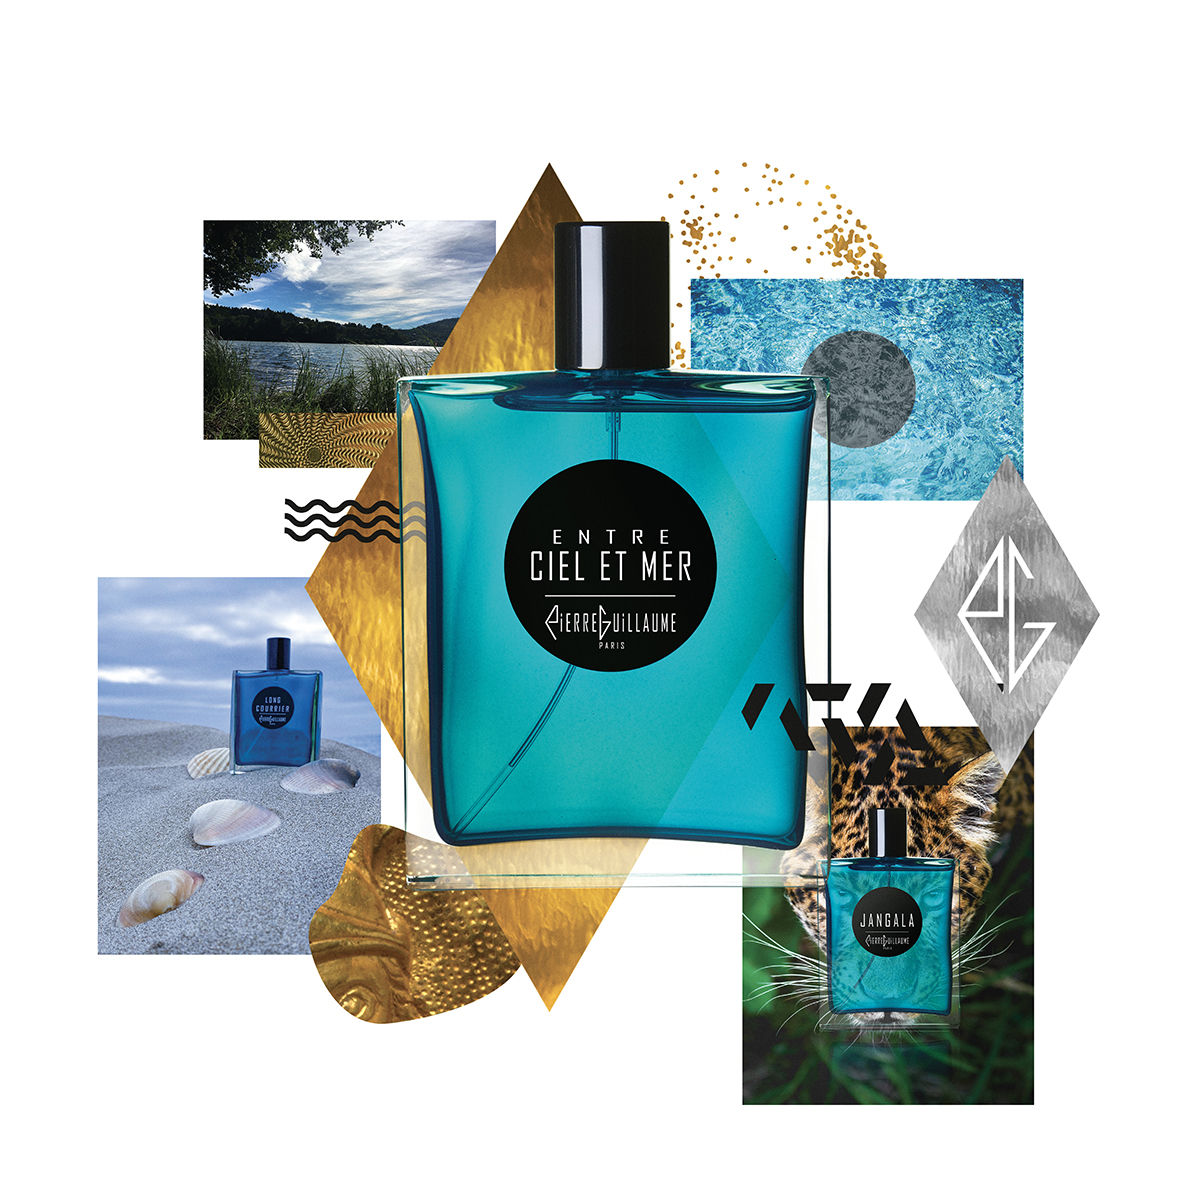 Pierre Guillaume Paris - Cruise, a taste of travel - Modern and contemporary perfumes, Niche perfumes - 50ml - 100ml.